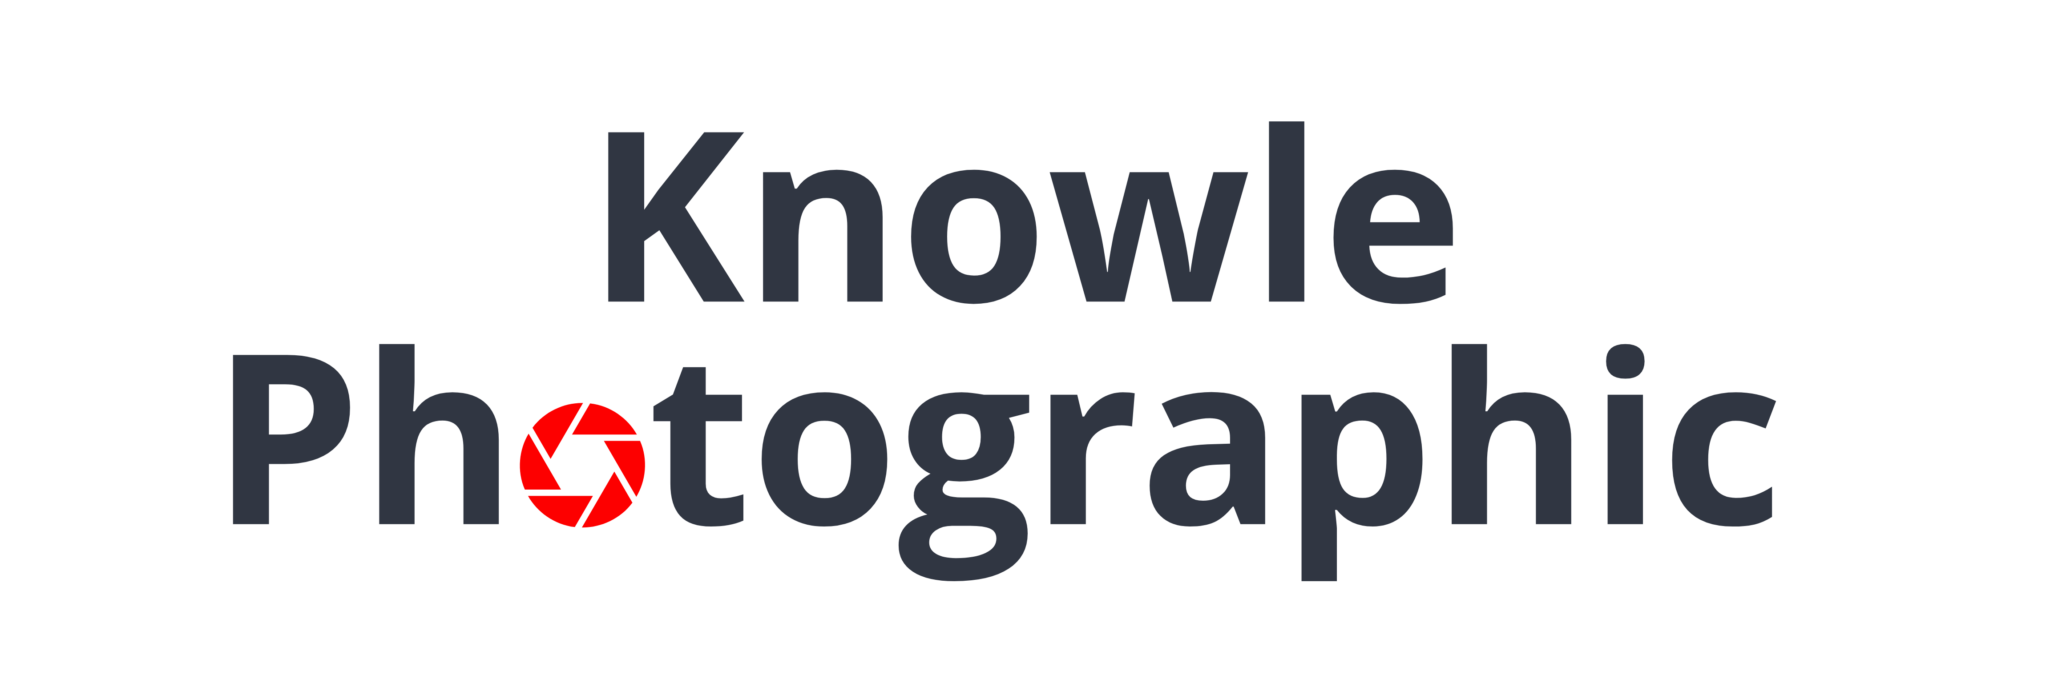 Knowle Photographic